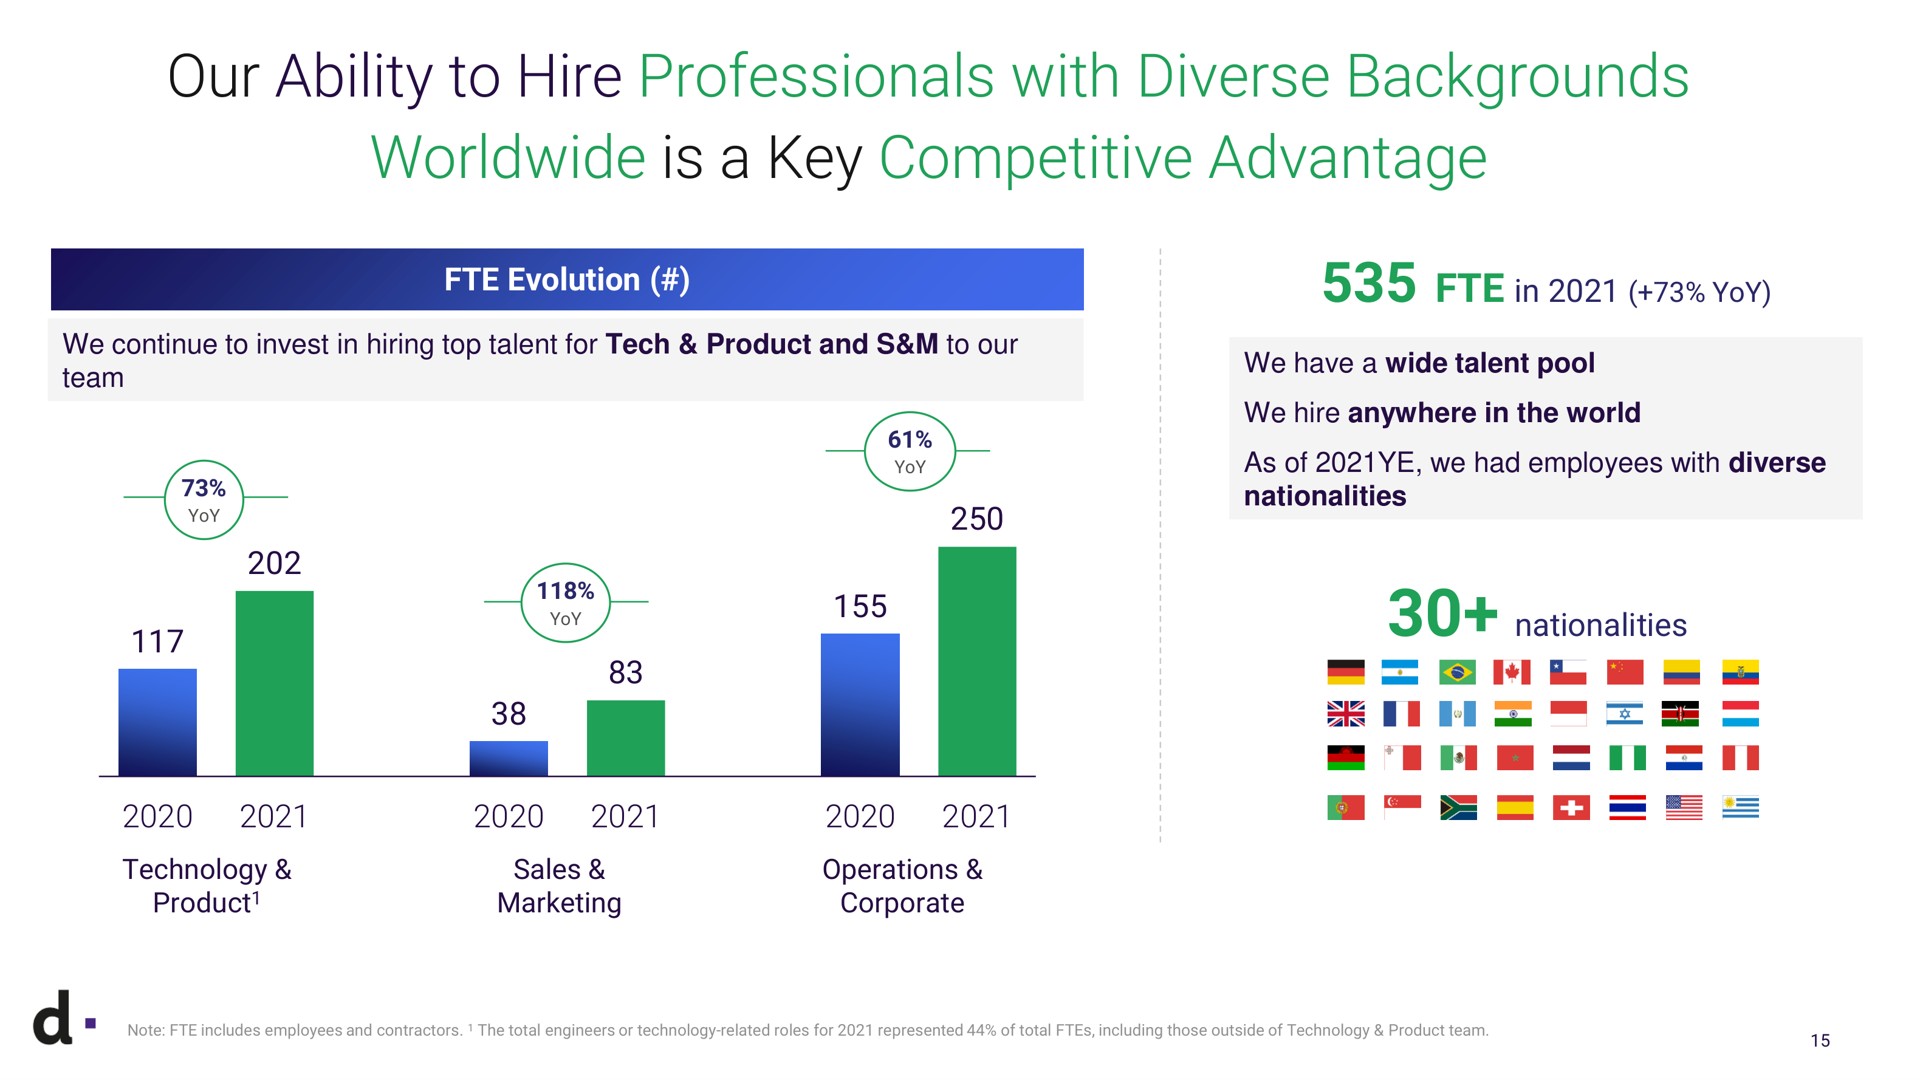 our ability to hire professionals with diverse backgrounds is a key competitive advantage we continue invest in hiring top talent for tech product and team technology product sales marketing operations corporate note includes employees and contractors the total engineers or technology related roles for represented of total including those outside of technology product team in we have wide talent pool we anywhere in the world as of we had employees nationalities nationalities sin | dLocal